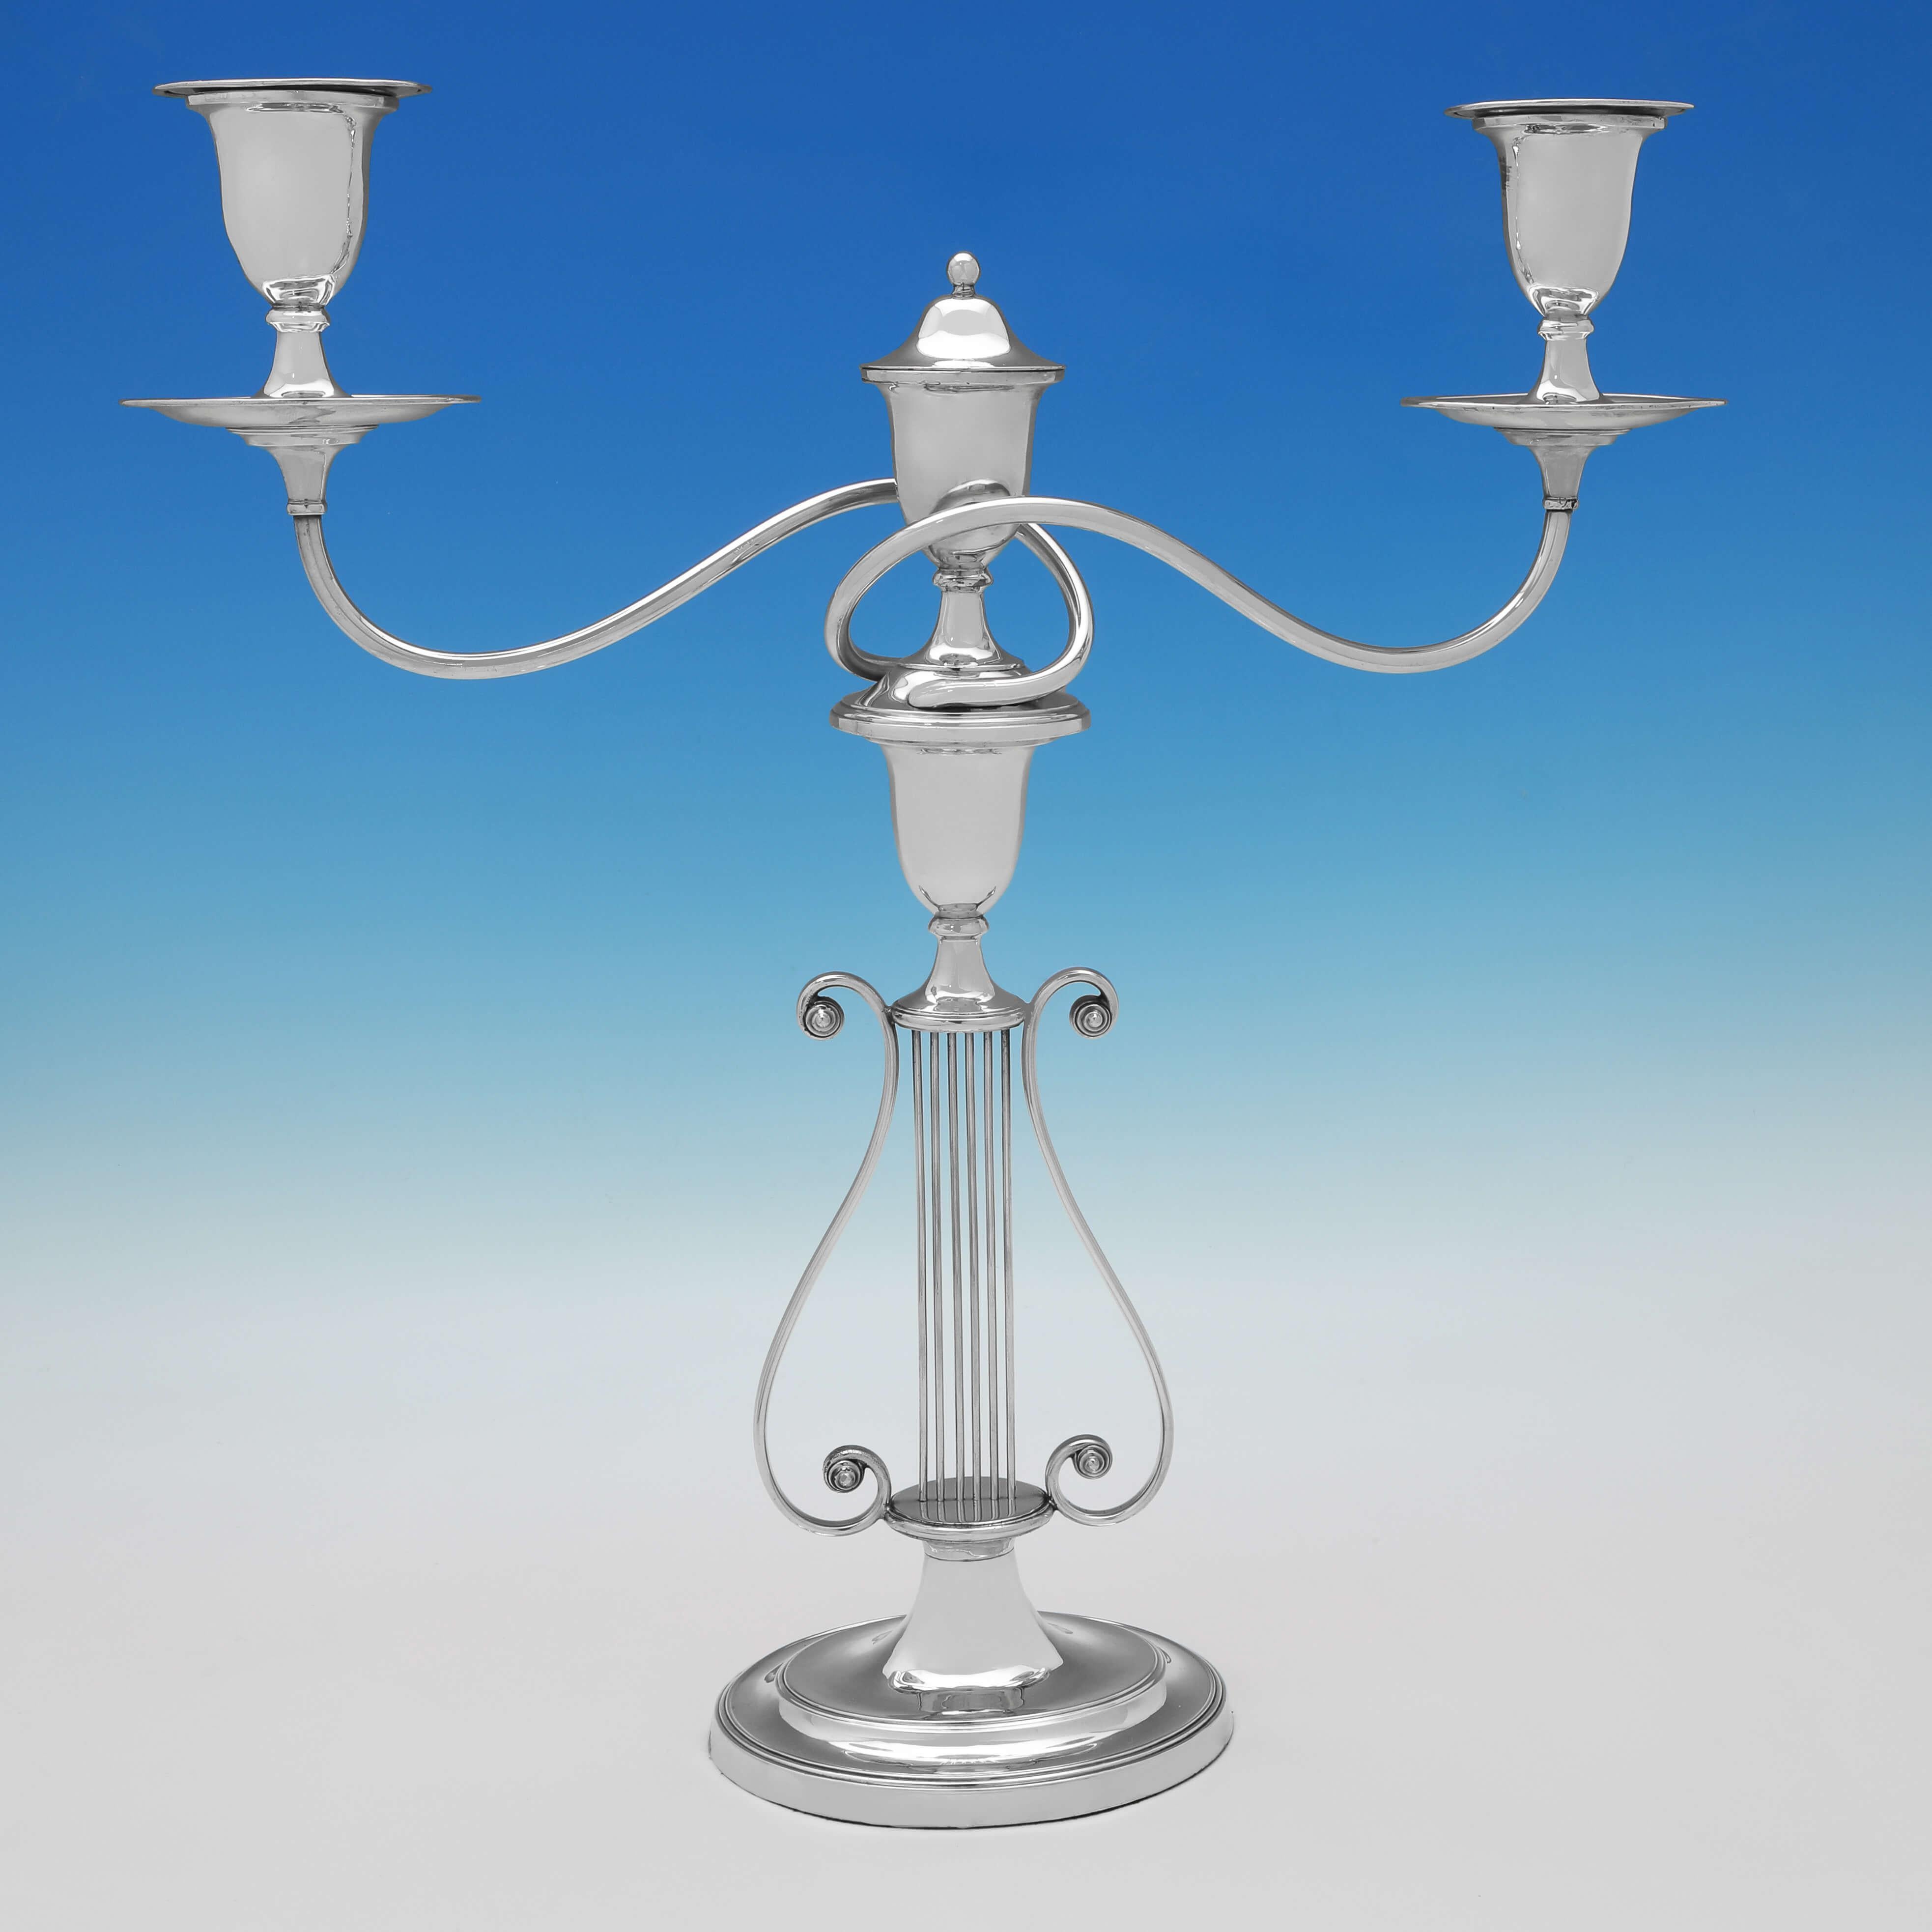 Made in London circa 1880, this charming pair of Antique, Silver Plated Candelabra, are in the 'Lyre' design, with each holding 2 candles. 

Each candelabrum measures 17.75